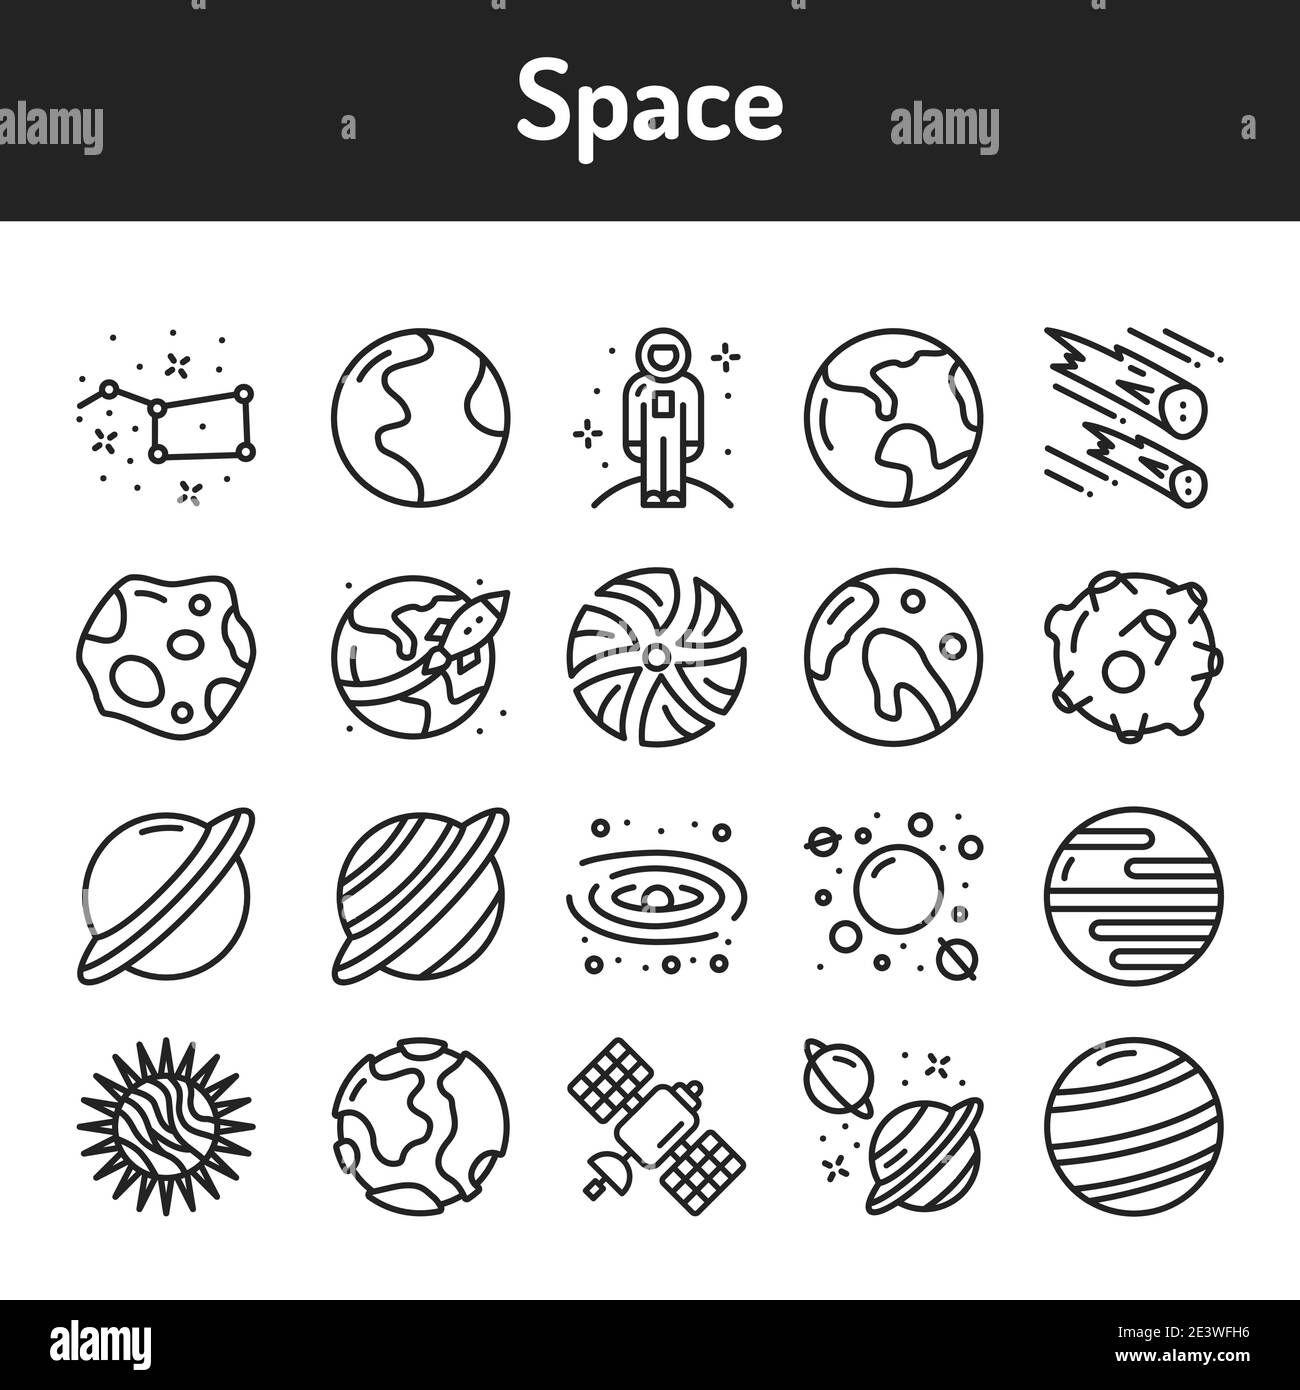 Space color line icons set. Pictograms for web page, mobile app, promo. Editable stroke. Stock Vector